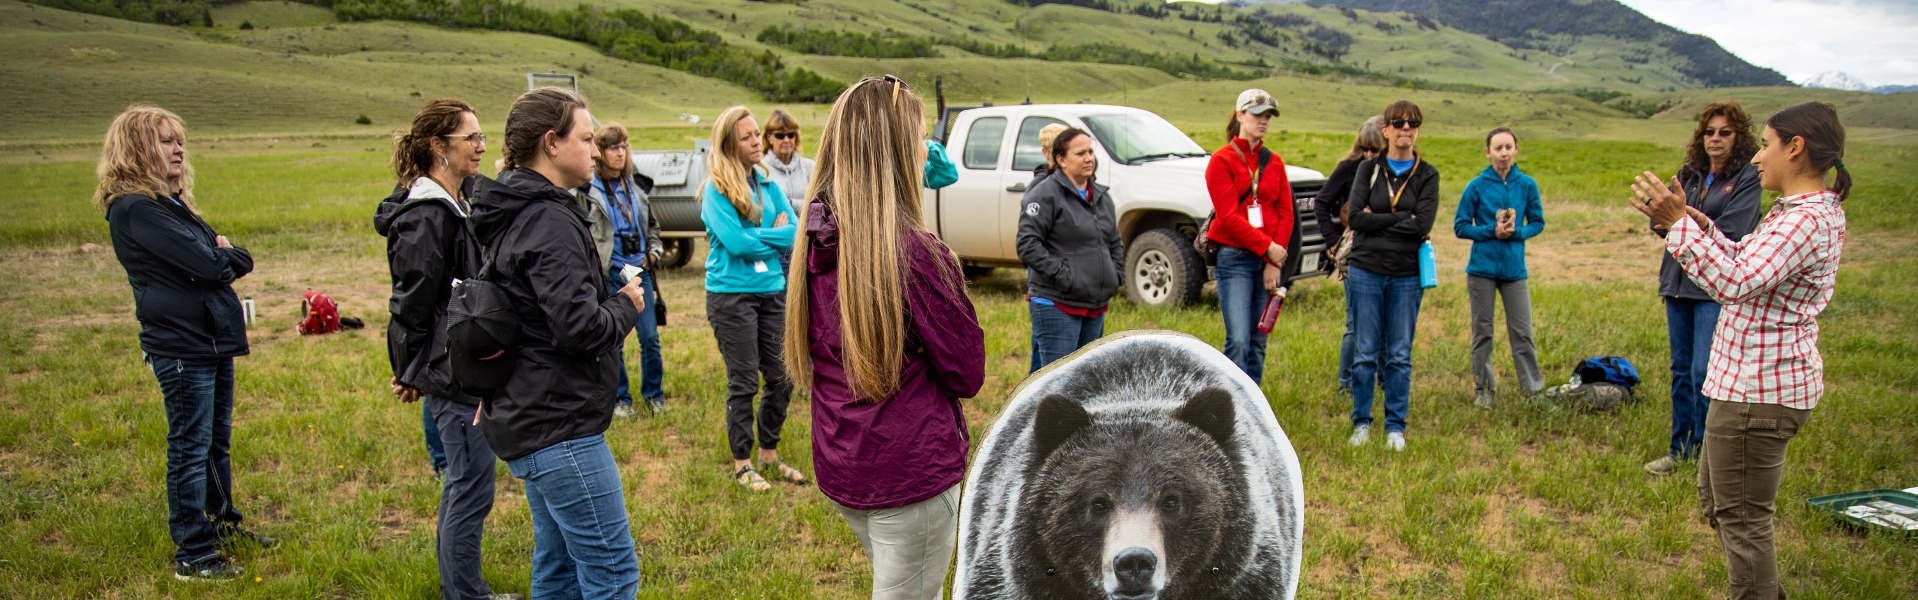 Group of people outdoors listening during a bear safety presentation.